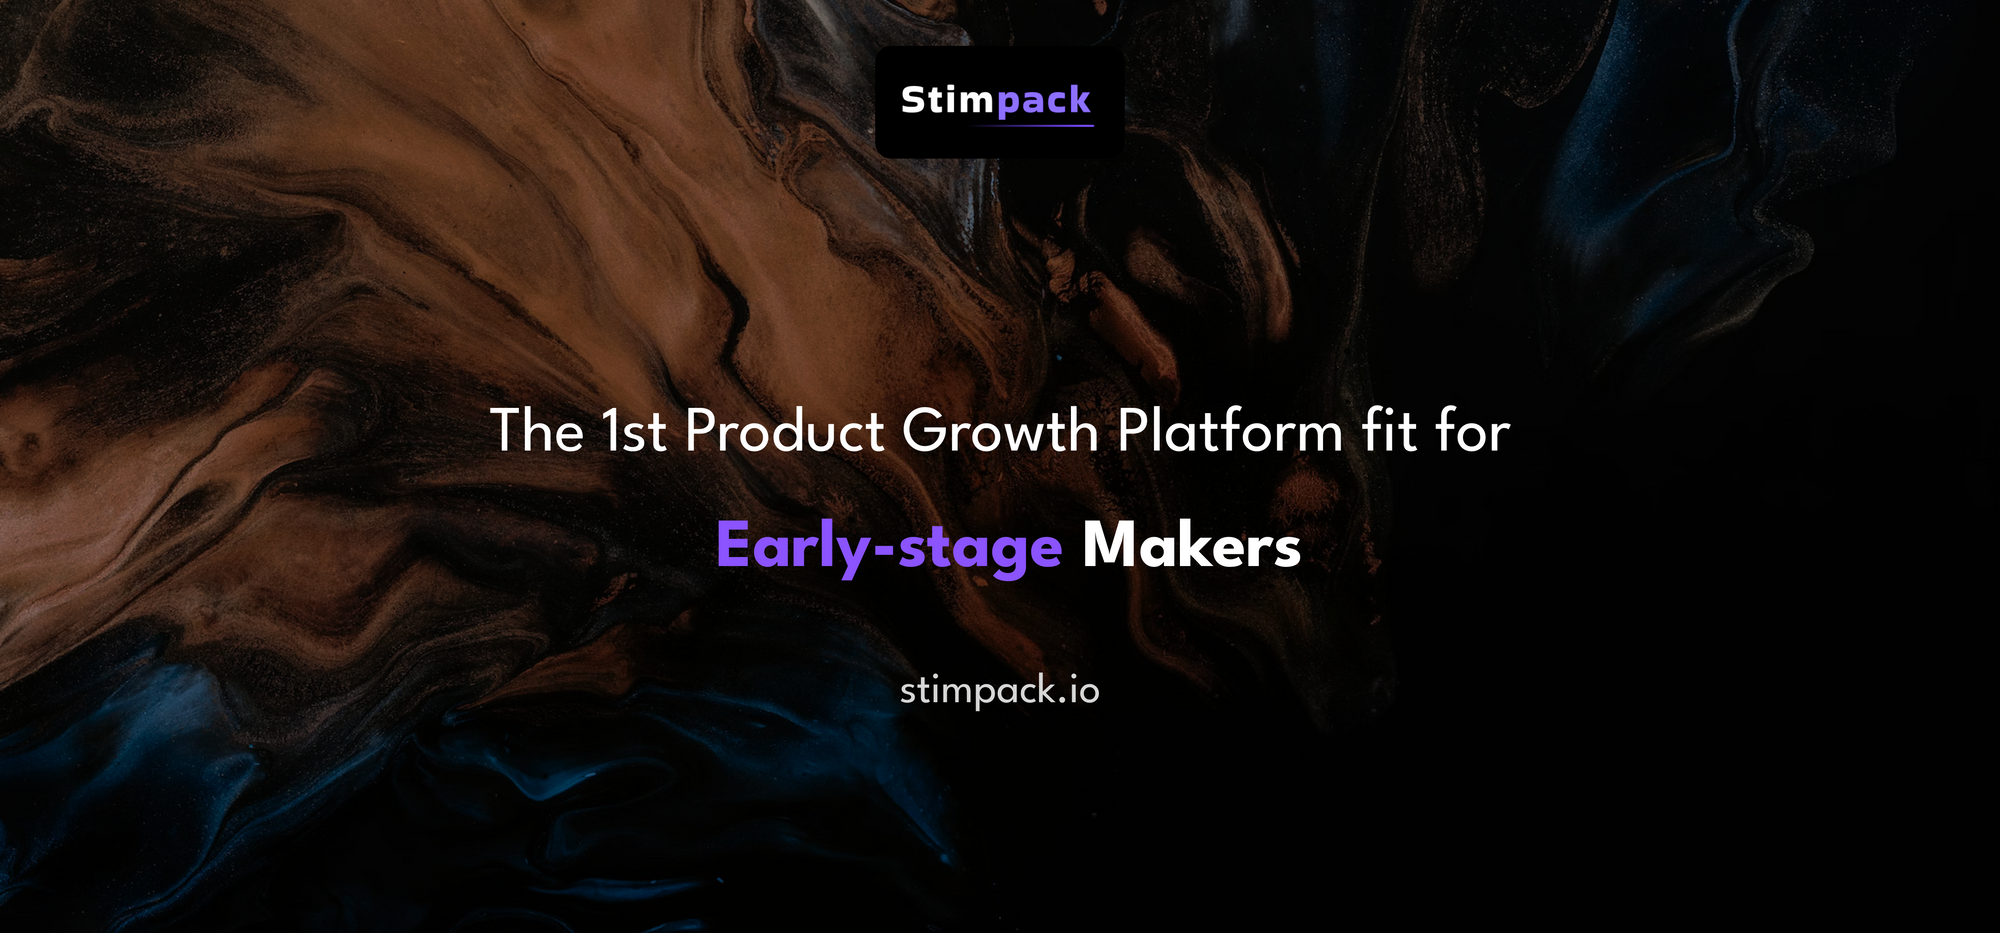 Stimpack, the 1st product growth platform fit for early-stage makers